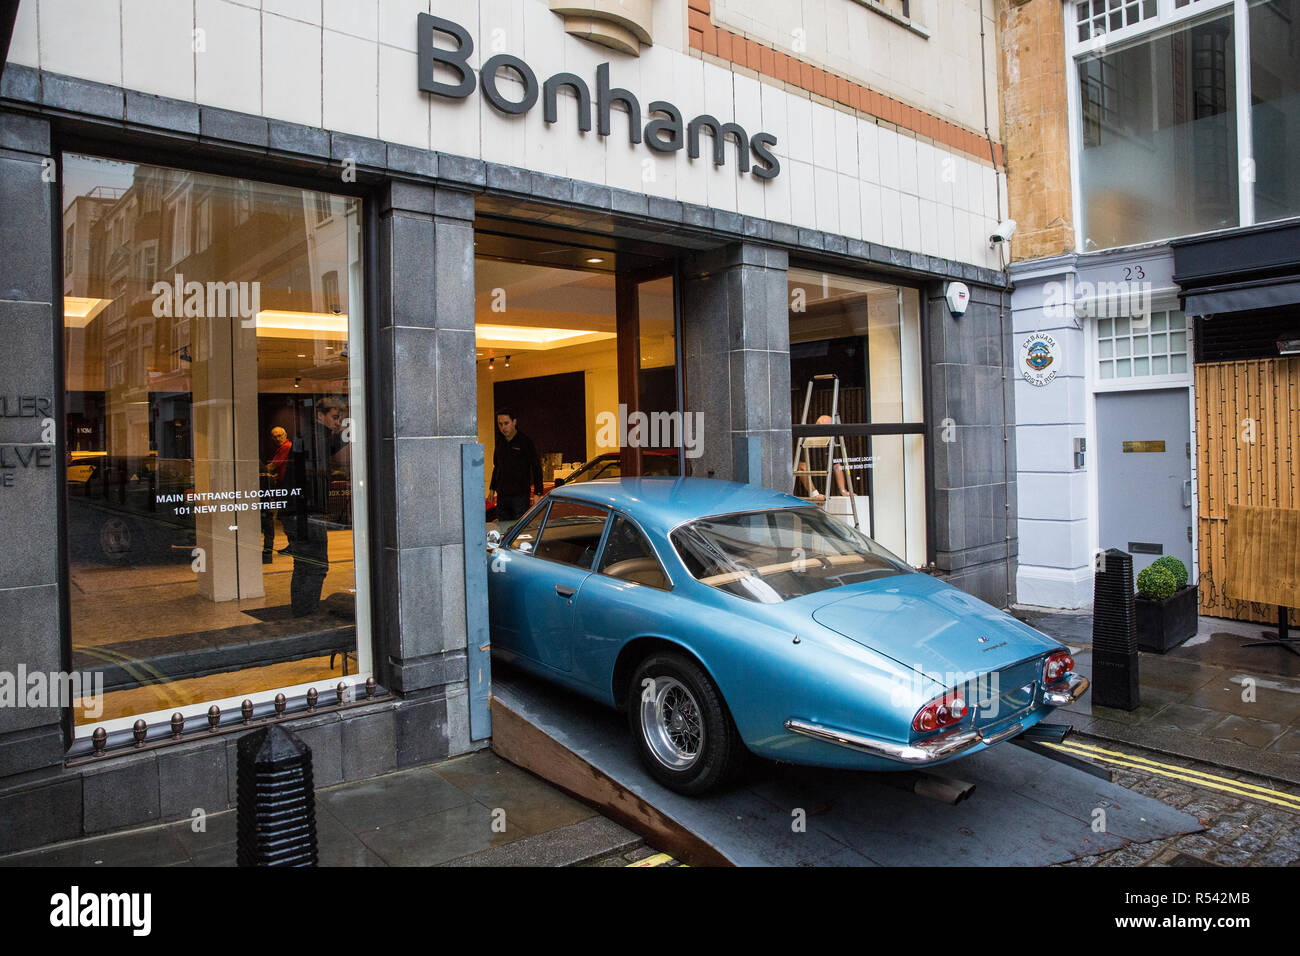 London, UK. 29th November, 2018. Bonhams' staff move a 1966 Ferrari 500 Superfast Series II Coupé, one of only 12 Series II Superfasts and the seventh of eight right-hand drive Superfasts, in preparation for an auction of historic and high-performance racing and road cars. Highlights include a Le Mans class-winning Jaguar XJ220C driven by David Coulthard (£2,200,000-2,800,000), a Lister Jaguar Knobbly (£2,200,000-2,800,000) and a 1958 BMW 507 owned by its designer, as well as Ferraris, Aston Martins, Bentleys, Porsches and Jaguars. Credit: Mark Kerrison/Alamy Live News Stock Photo